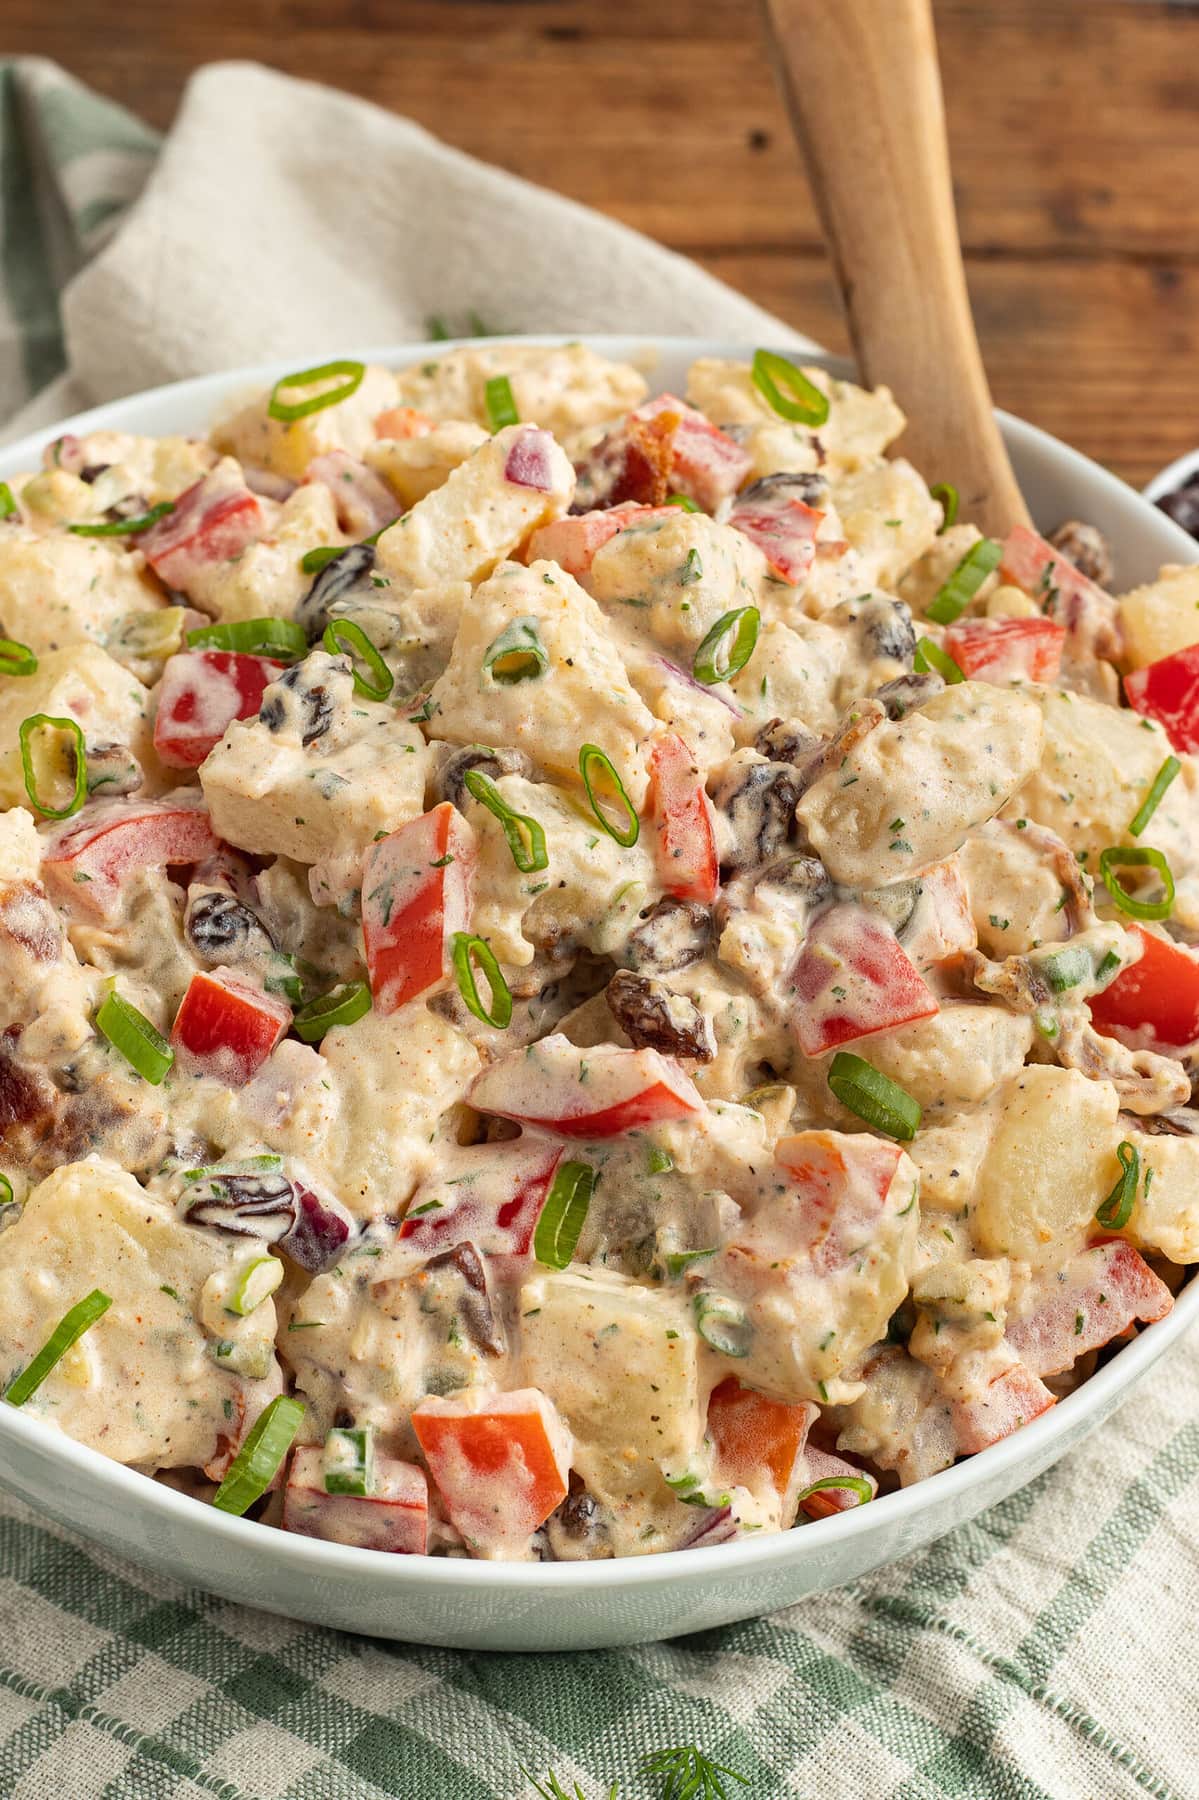 Potato salad with raisins, red onions, and red bell pepper in a large bowl.